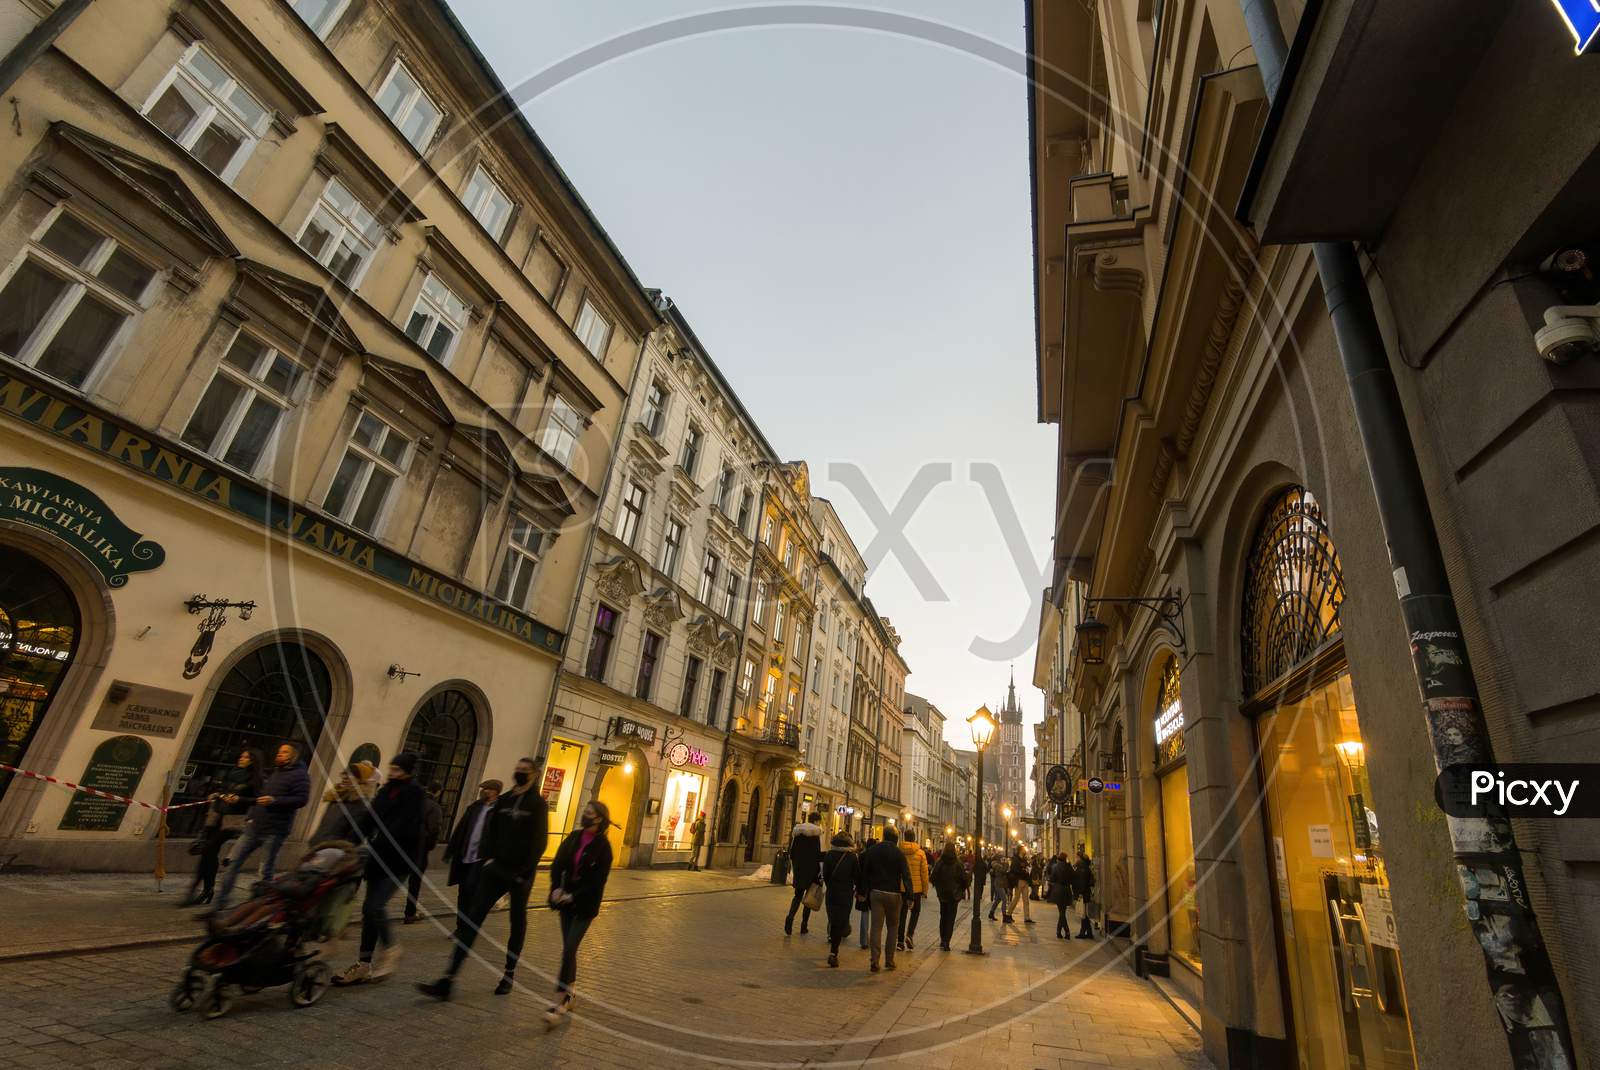 Krakow, Poland - February 20, 2021: Wide Angle Shot Of A European Street And People Taking A Walk During Evening In The Old Town Of Cracow City. People Walking On Narrow European Commercial Street